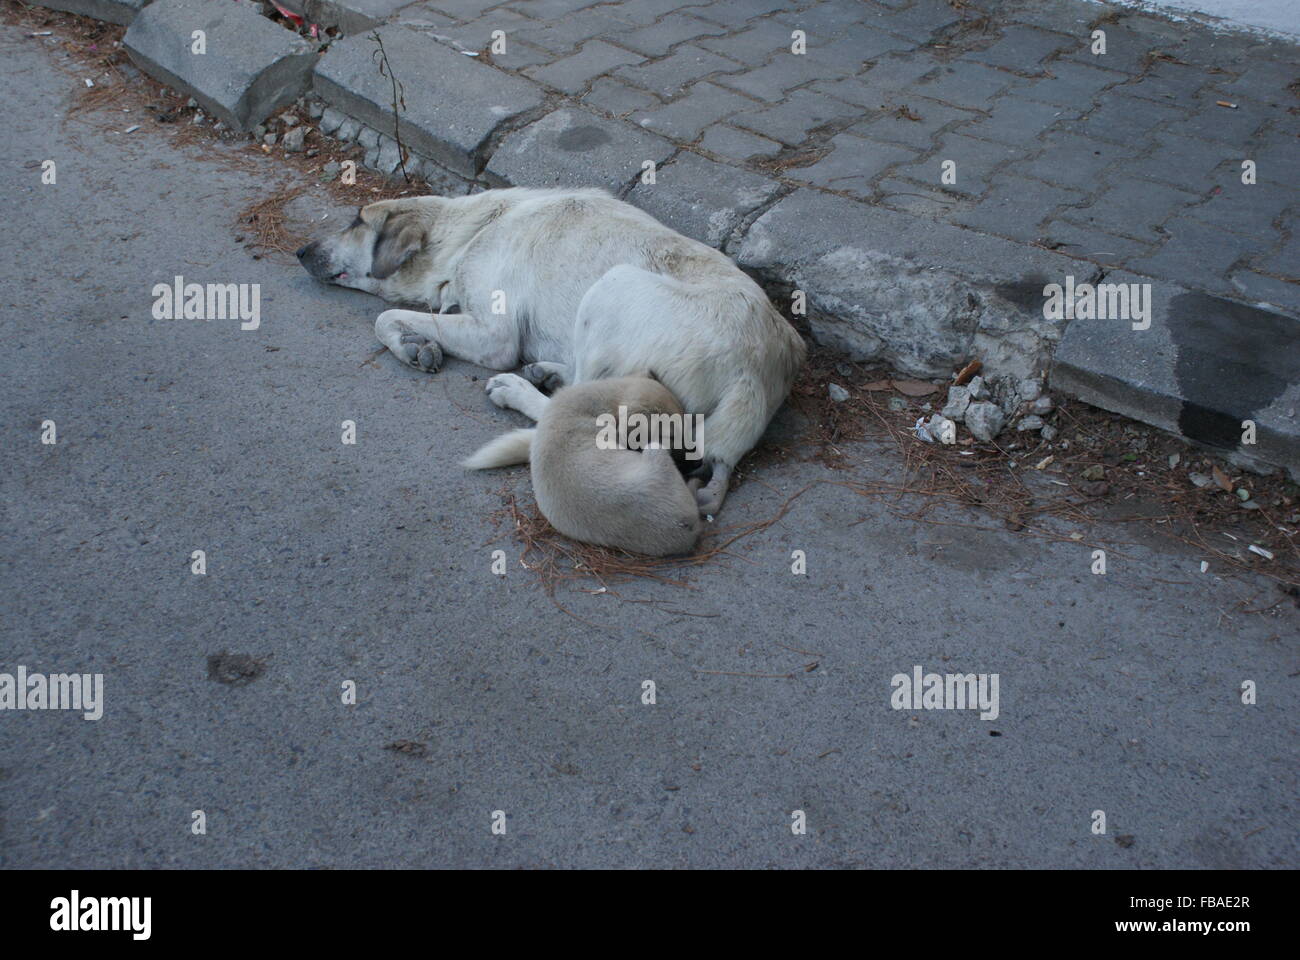 Mother dog and little puppy sleeping together on cobblestone Stock Photo